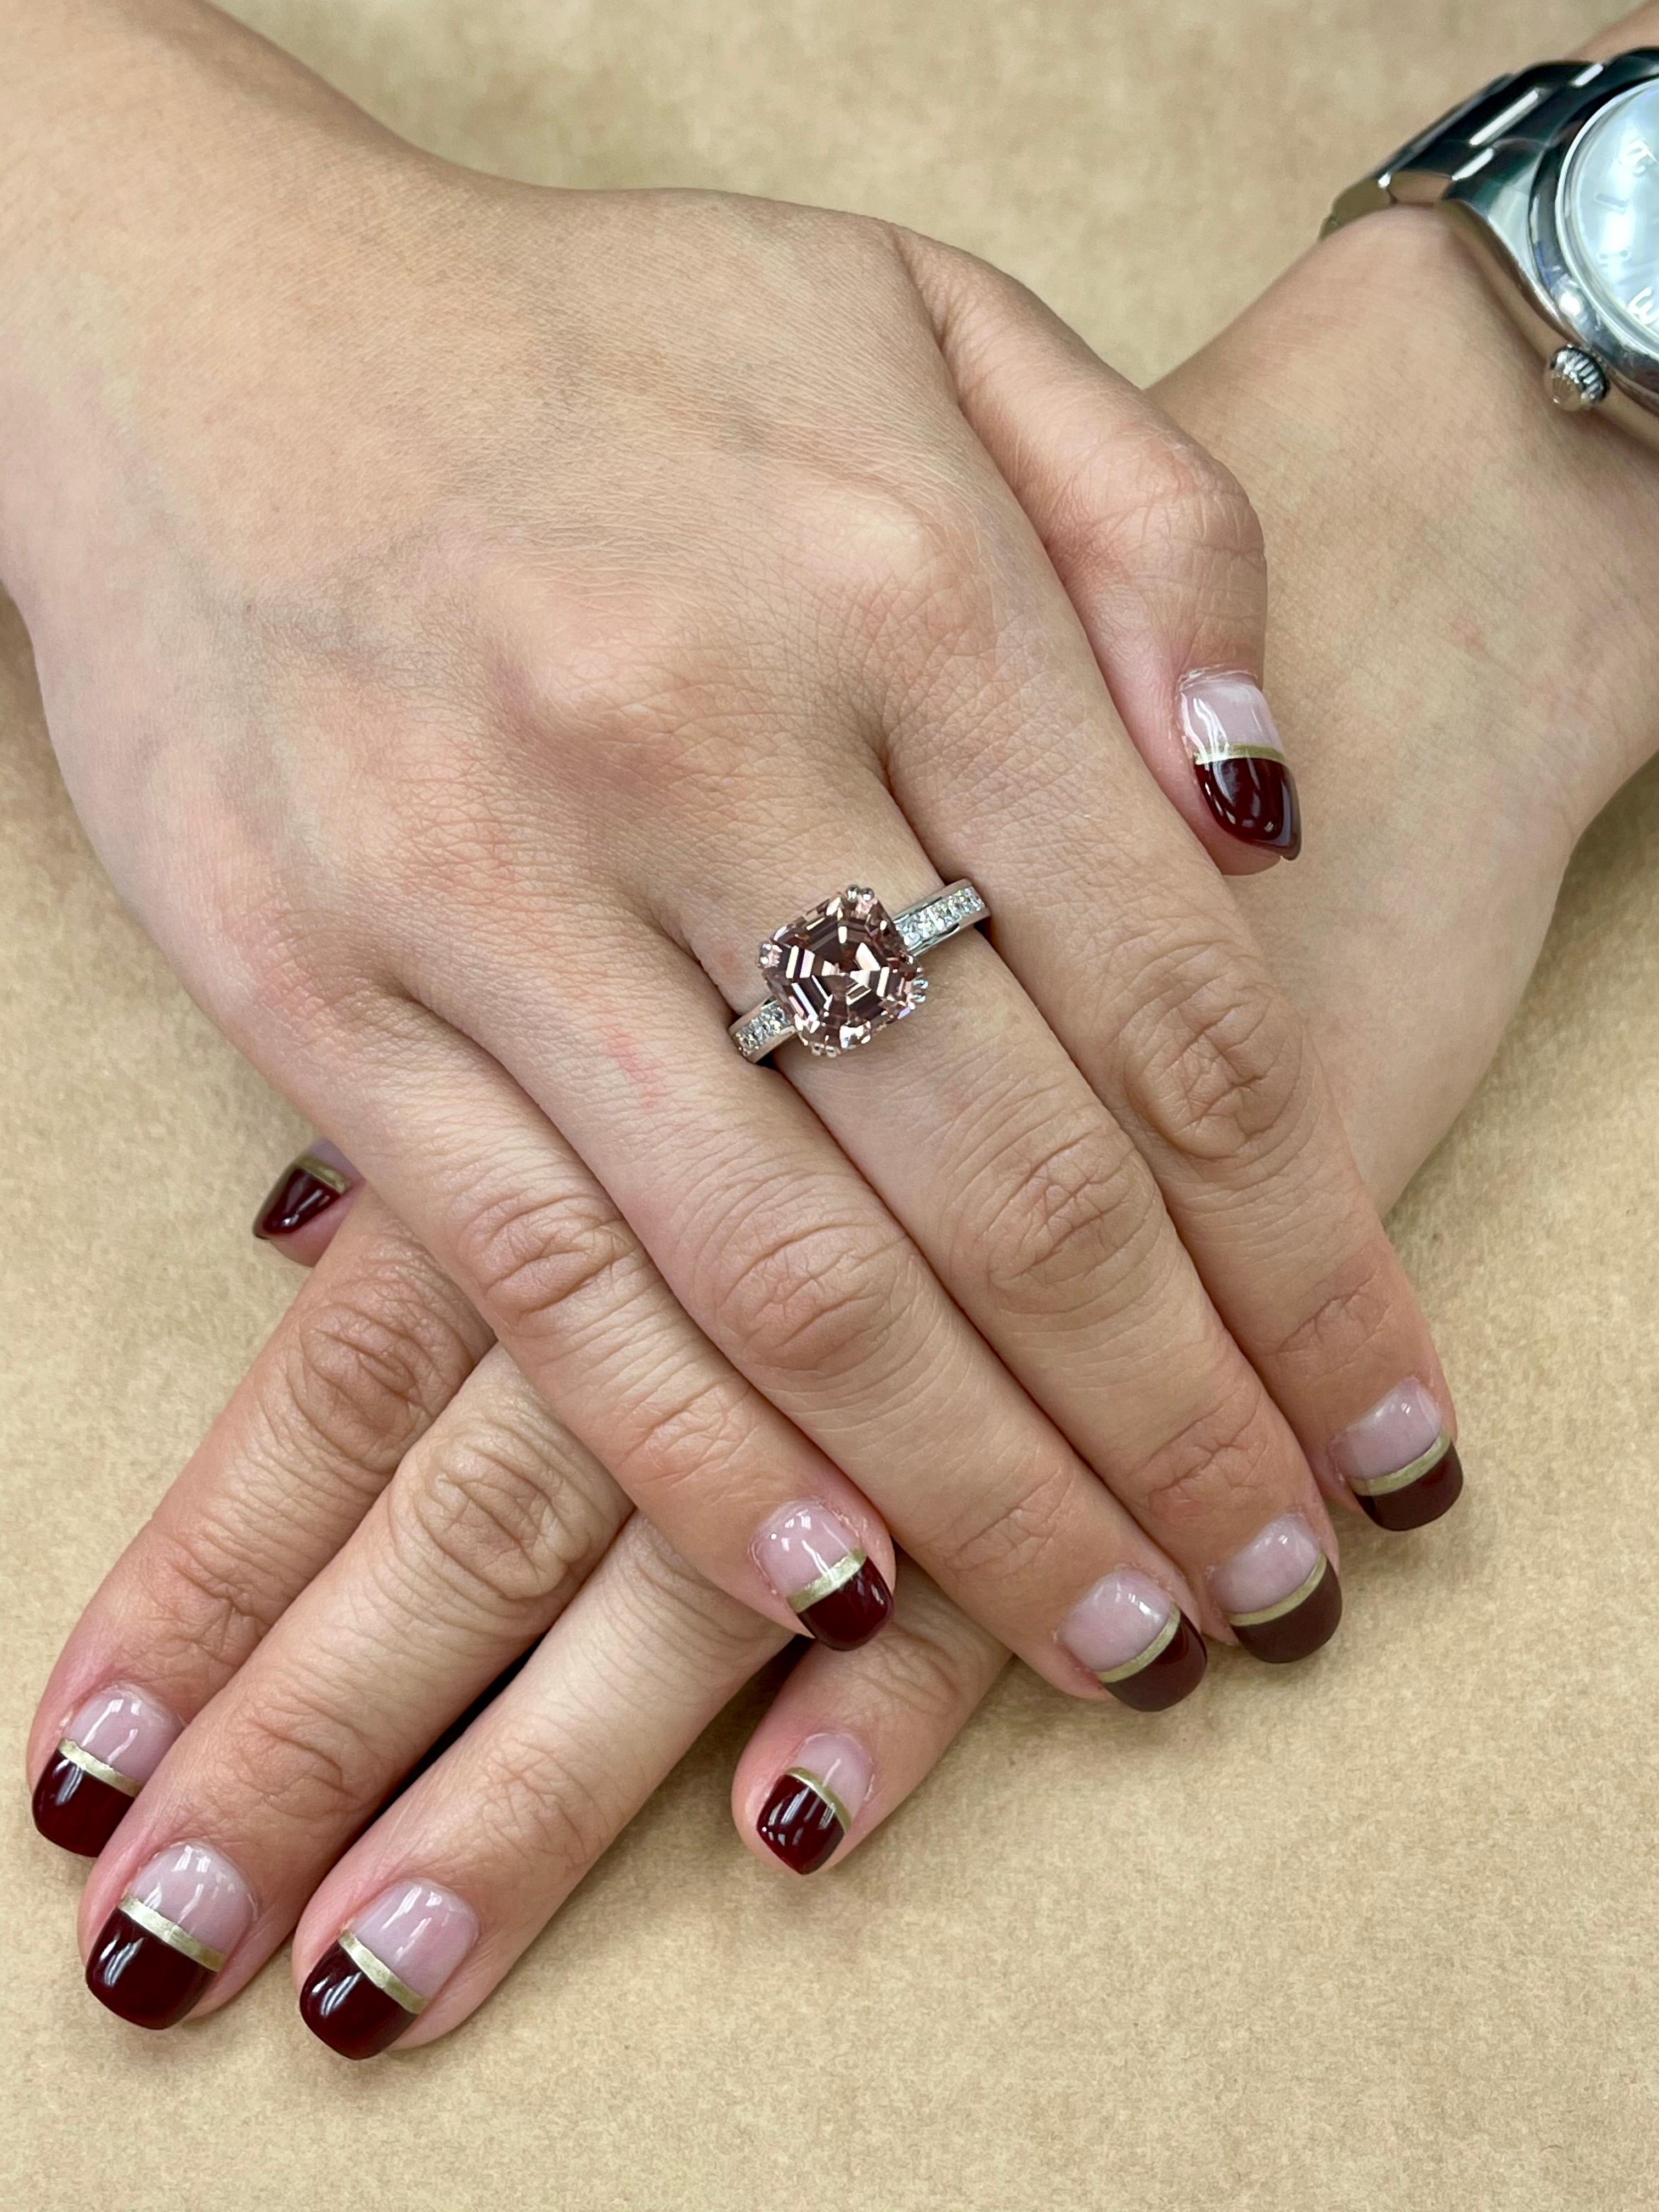 Please check out the HD video for the most accurate color representation! Here is a nice natural peach pink tourmaline ring with princess cut white diamonds. This ring will defiantly make a statement. The color really 